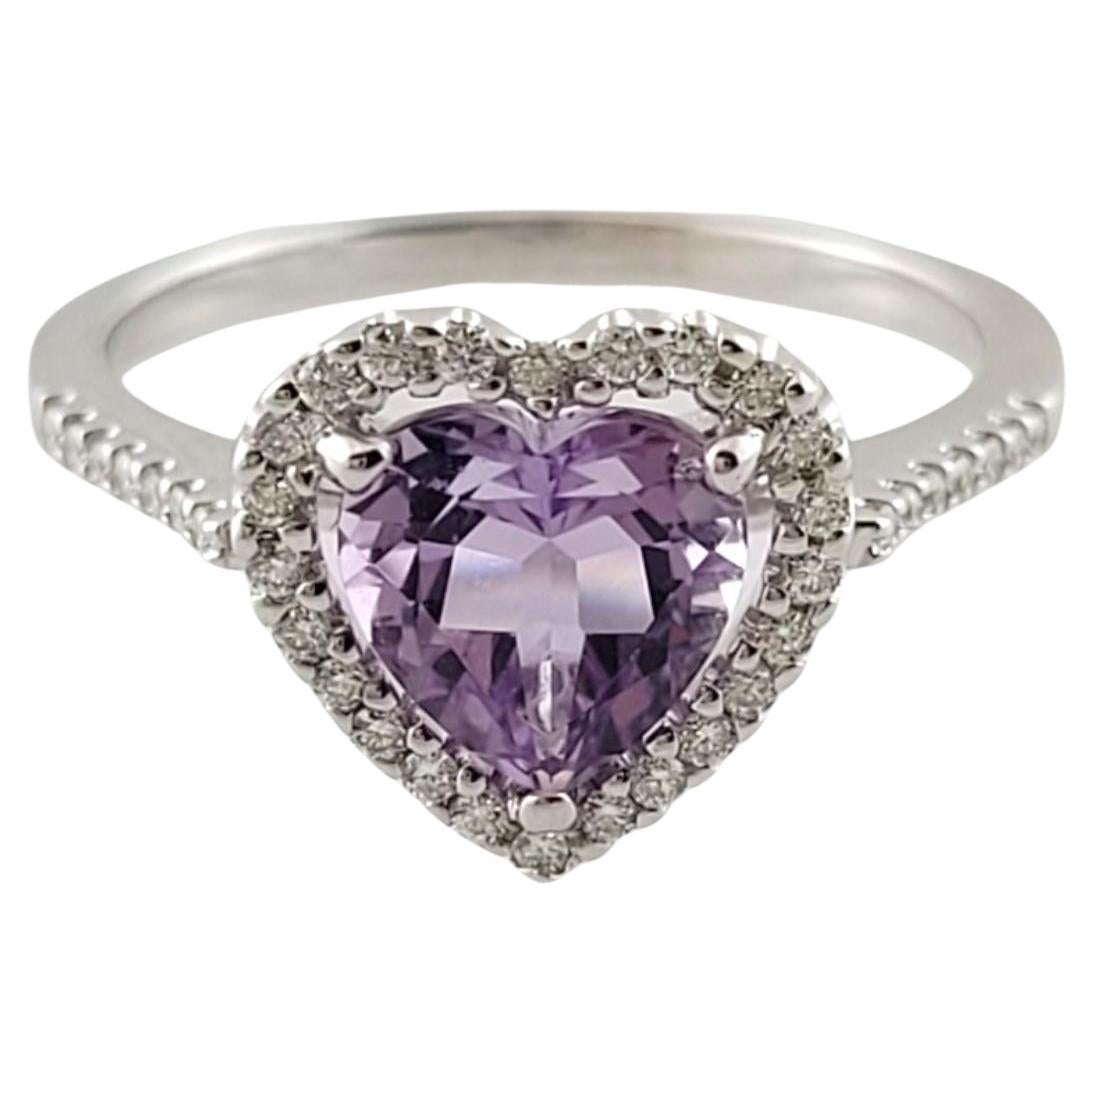 18K White Gold Diamond & Amethyst Heart Halo Ring Size 6.5 #16289 For Sale